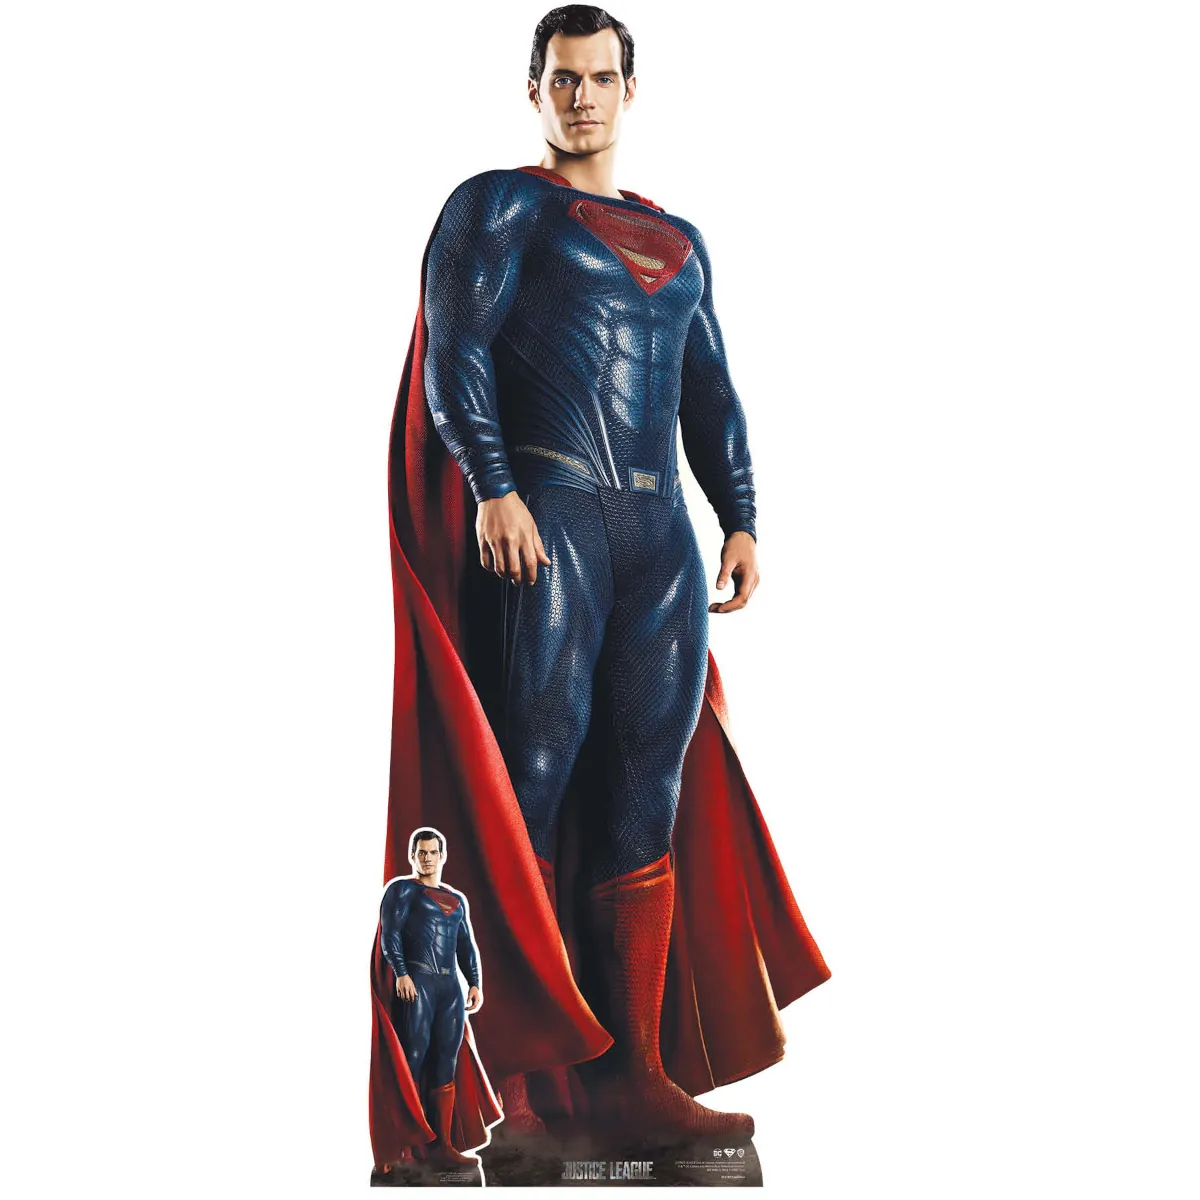 SC4189 Superman 'Justice League' (Henry Cavill) Official Lifesize + Mini Cardboard Cutout Standee Front